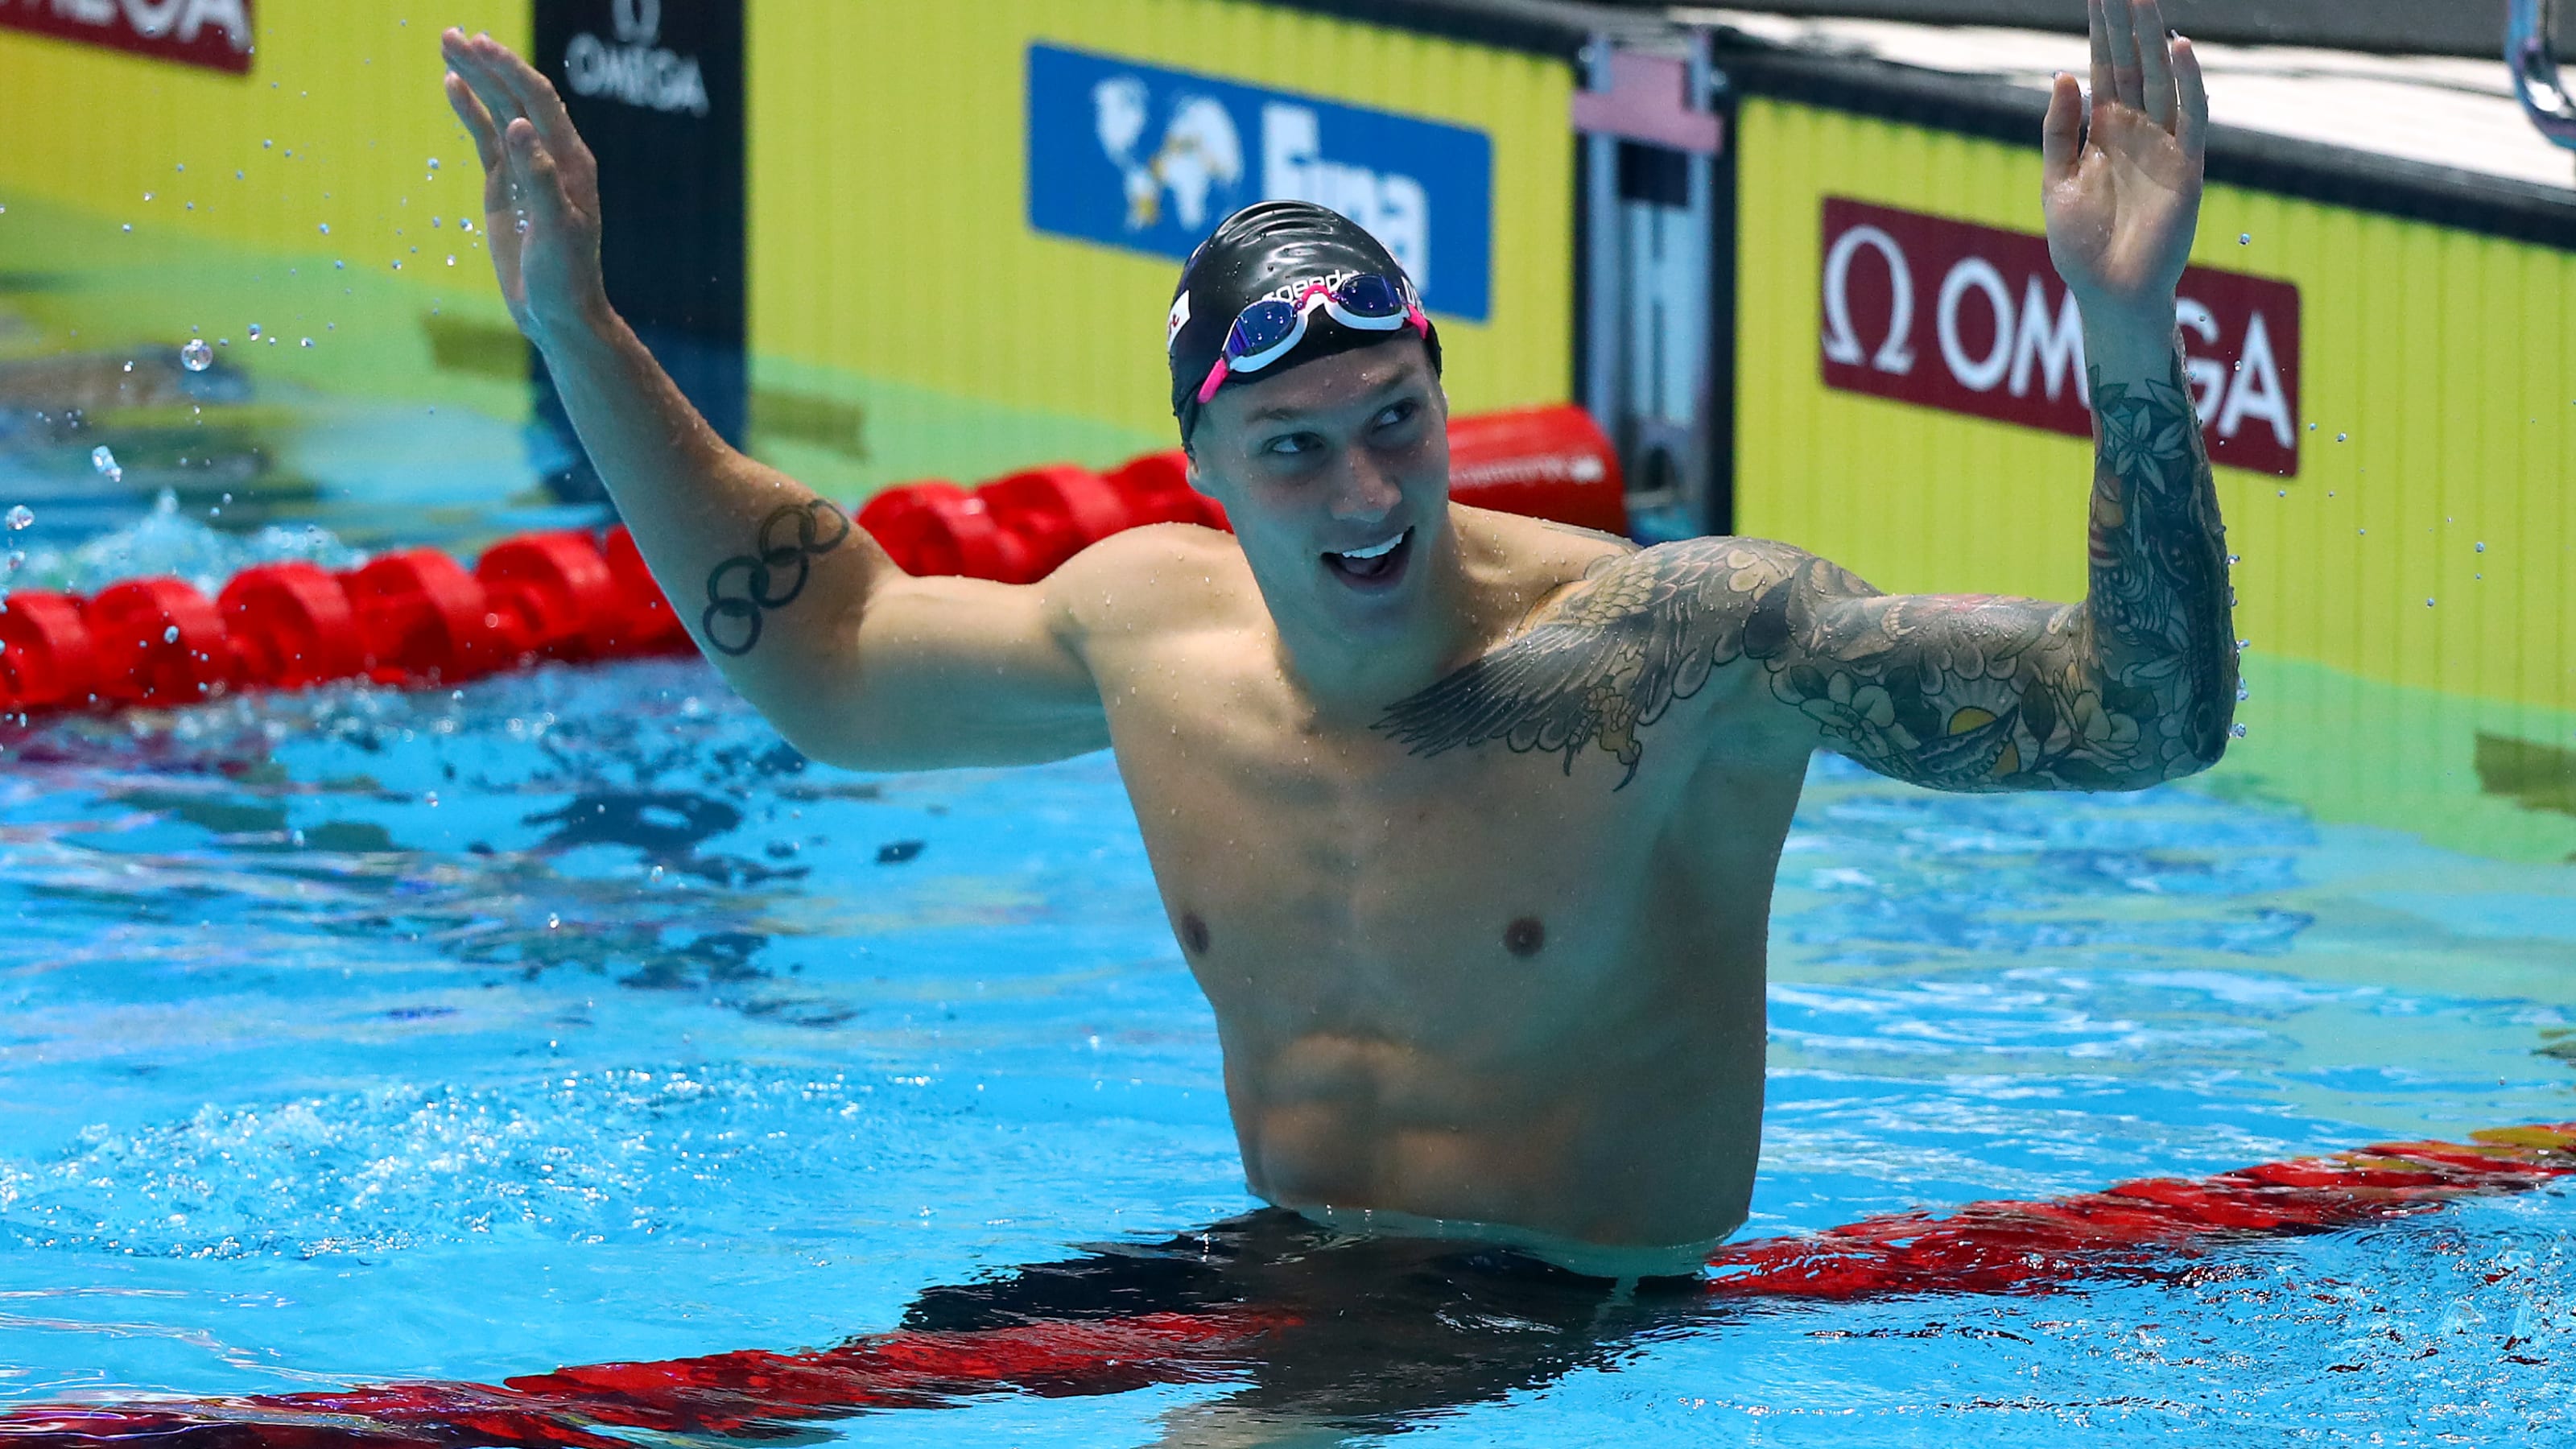 World records and a new Caeleb Dressel: Ten things learned from the 2019 FINA World Championships